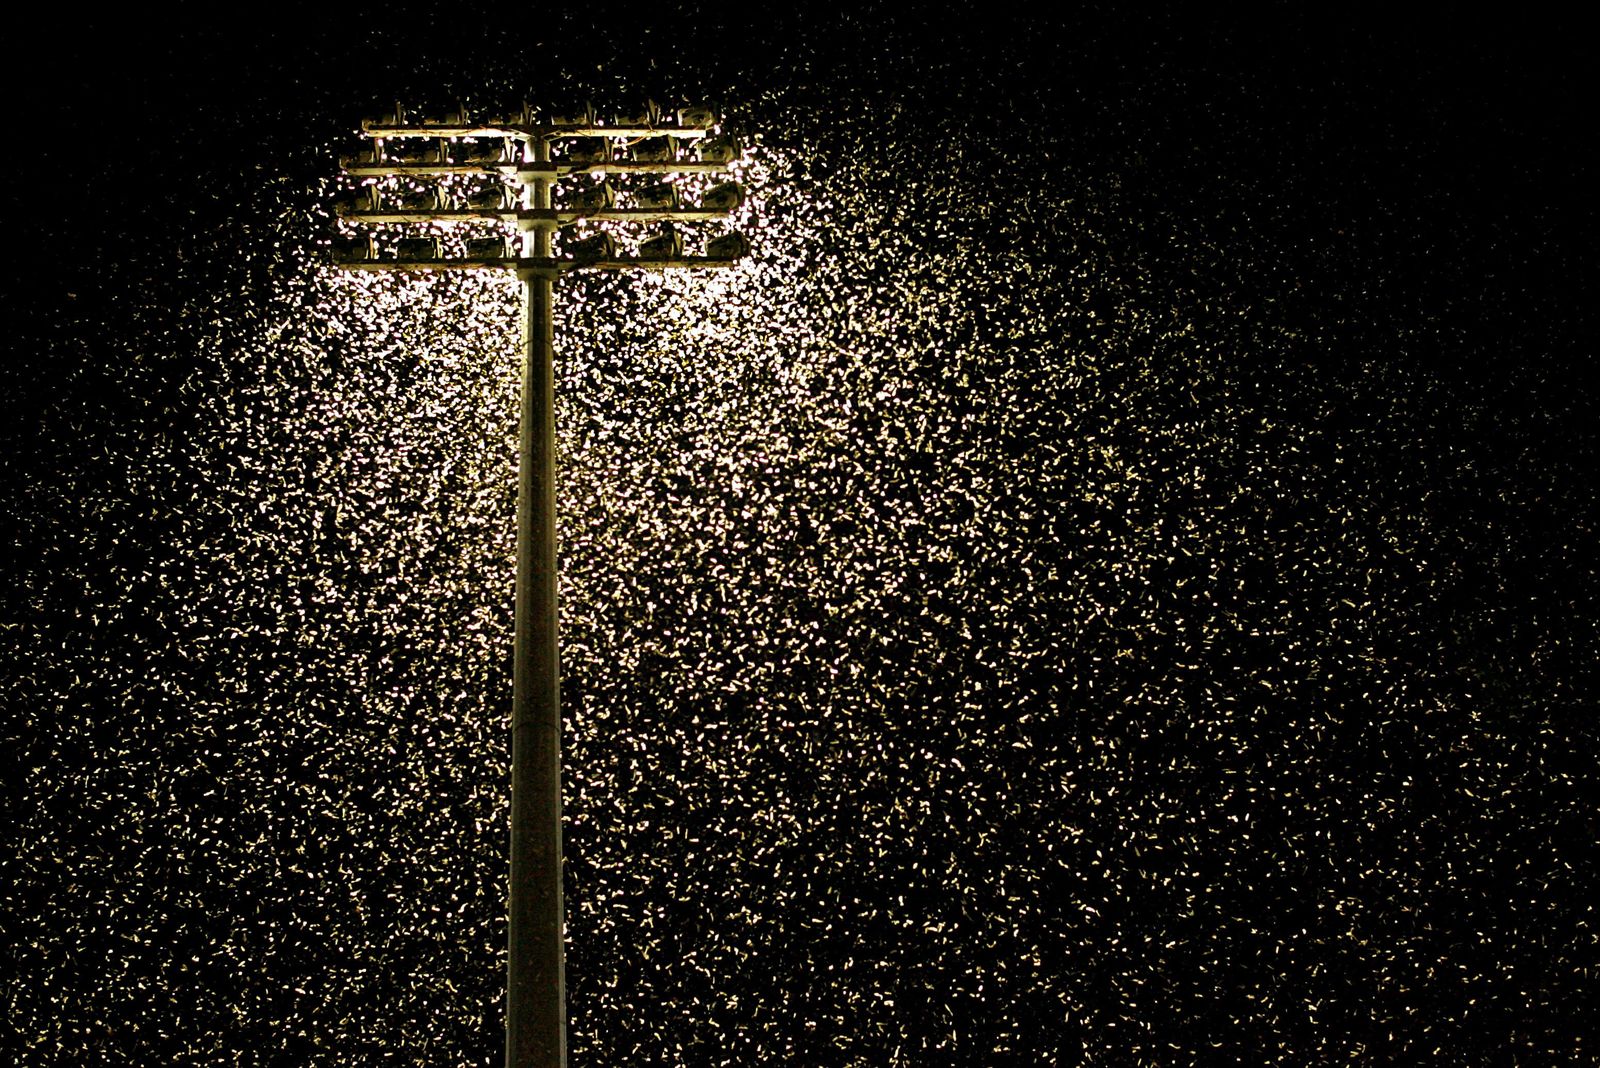 Do LED Lights Keep Bugs Away? - Light Colors to Reduce Insects